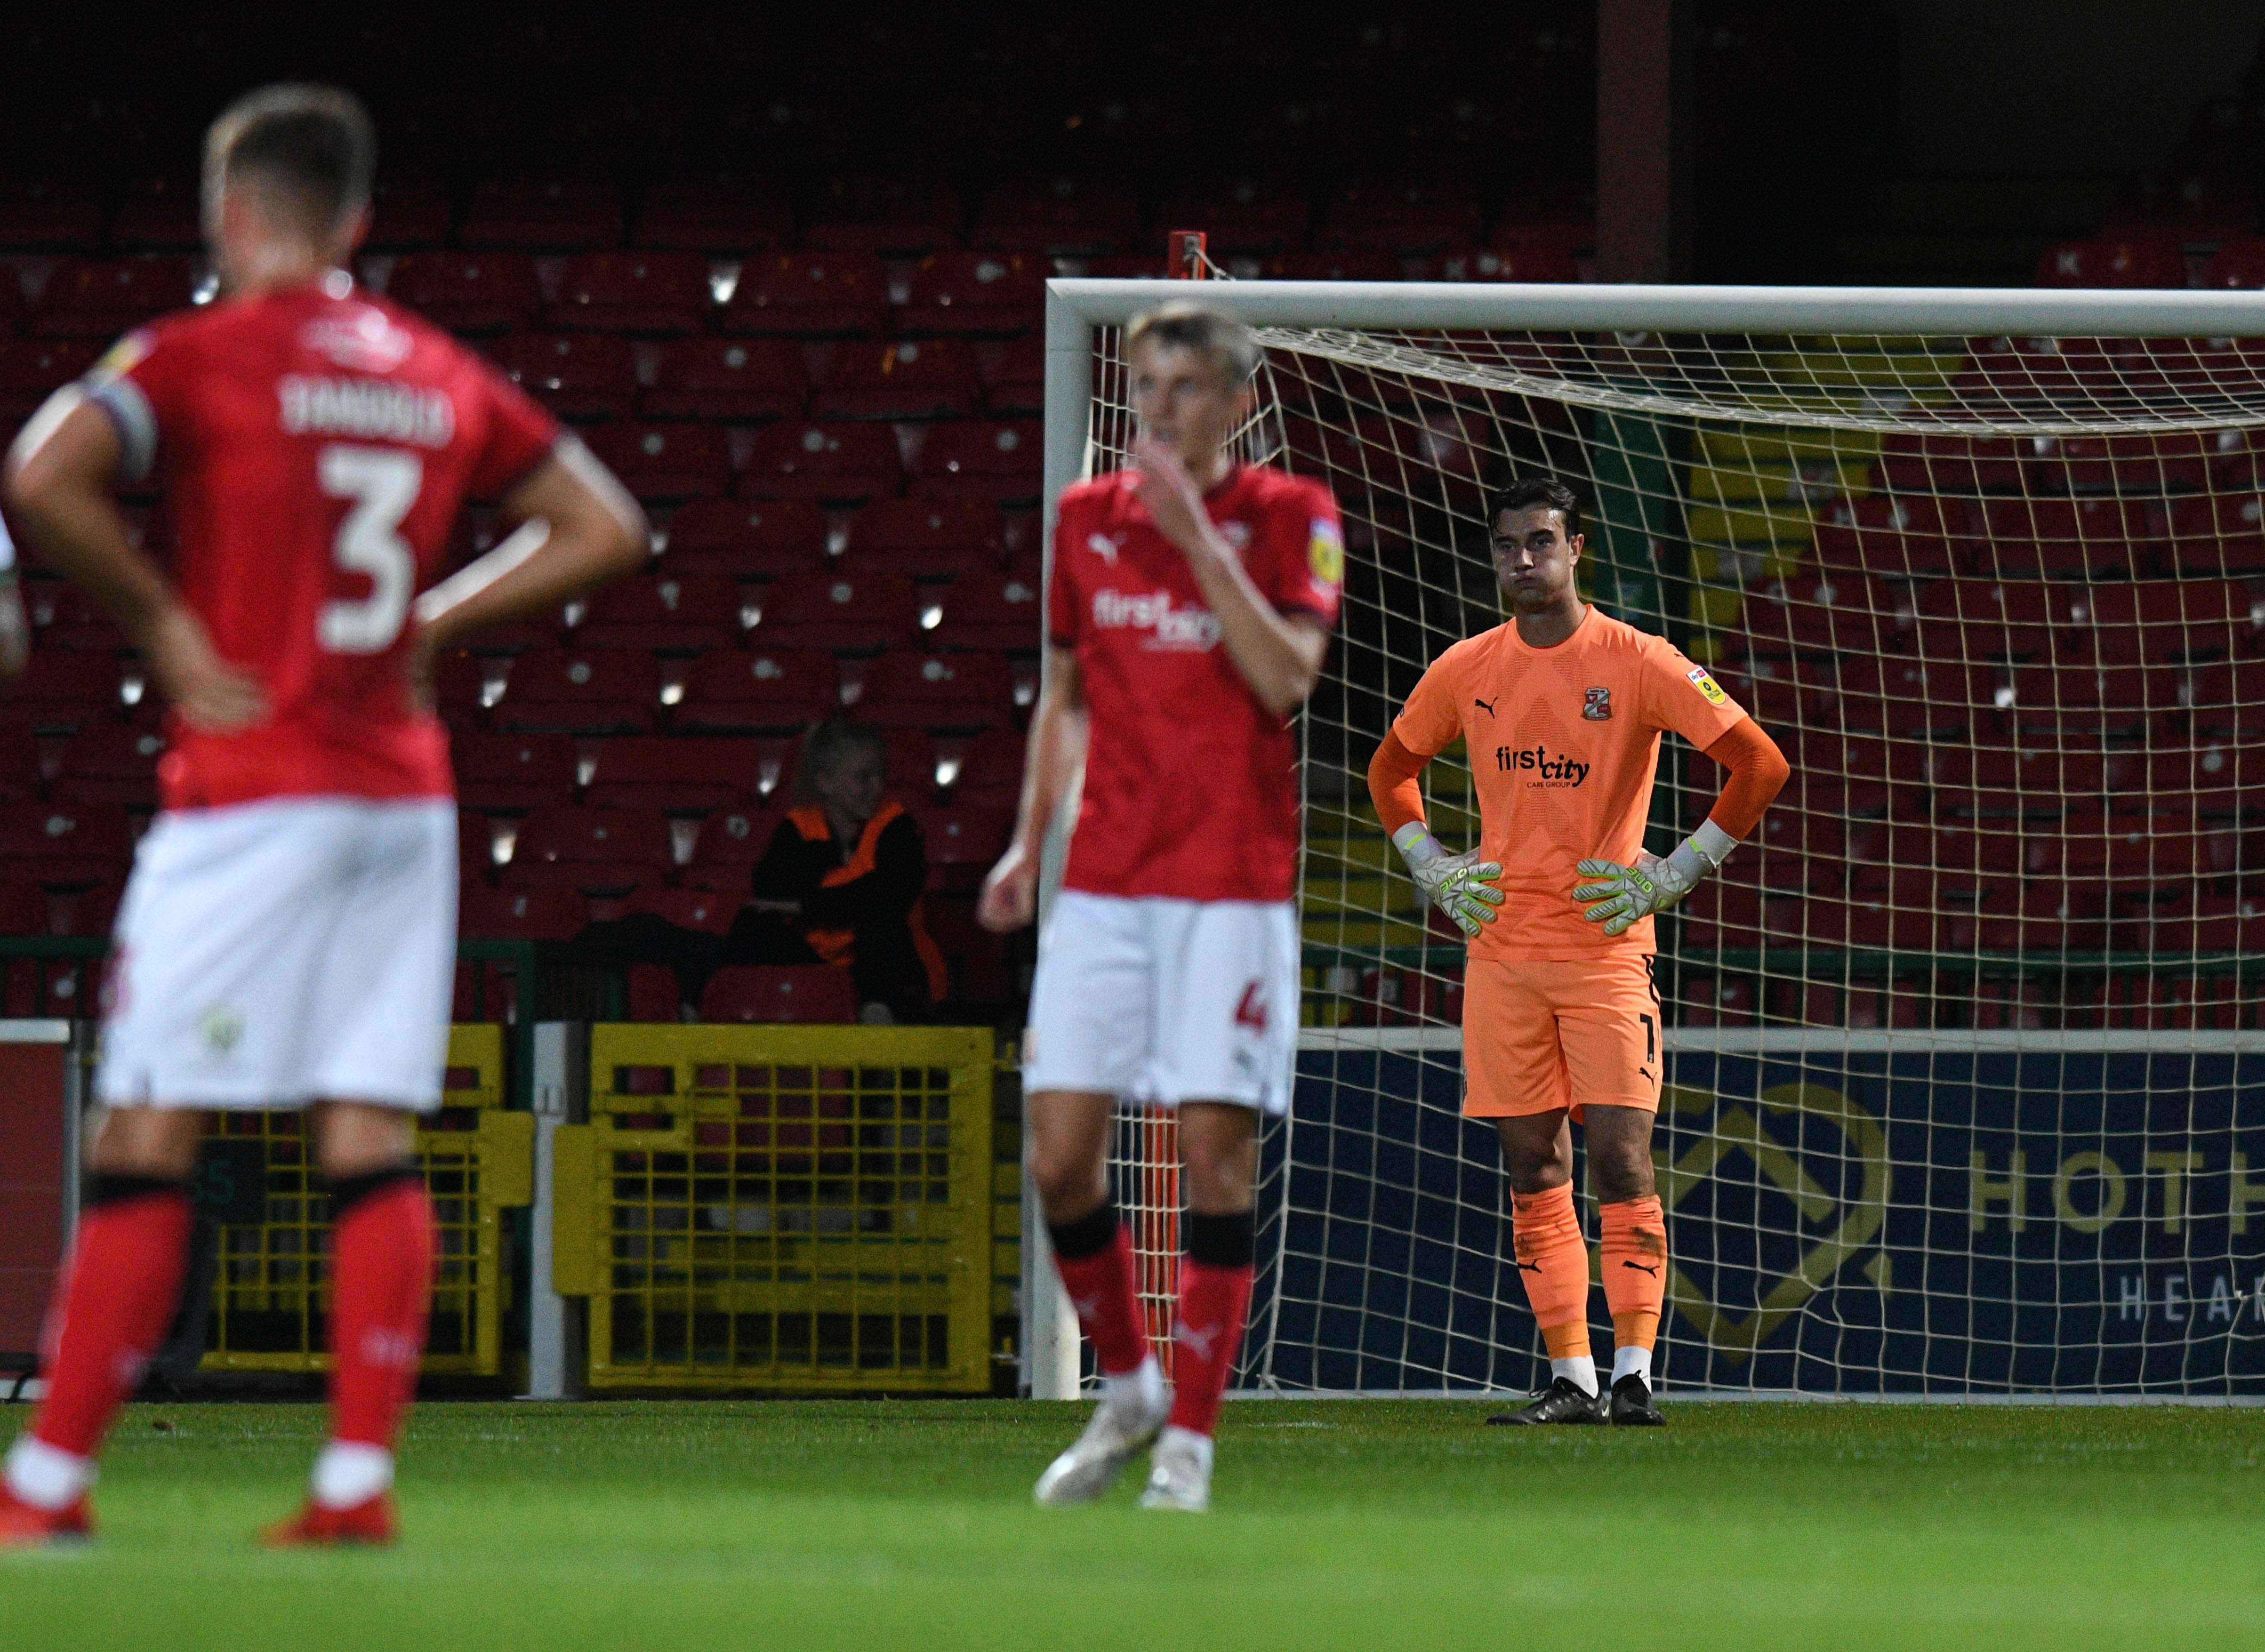 MATCH REPORT: Swindon Town (1) Plymouth Argyle (3)